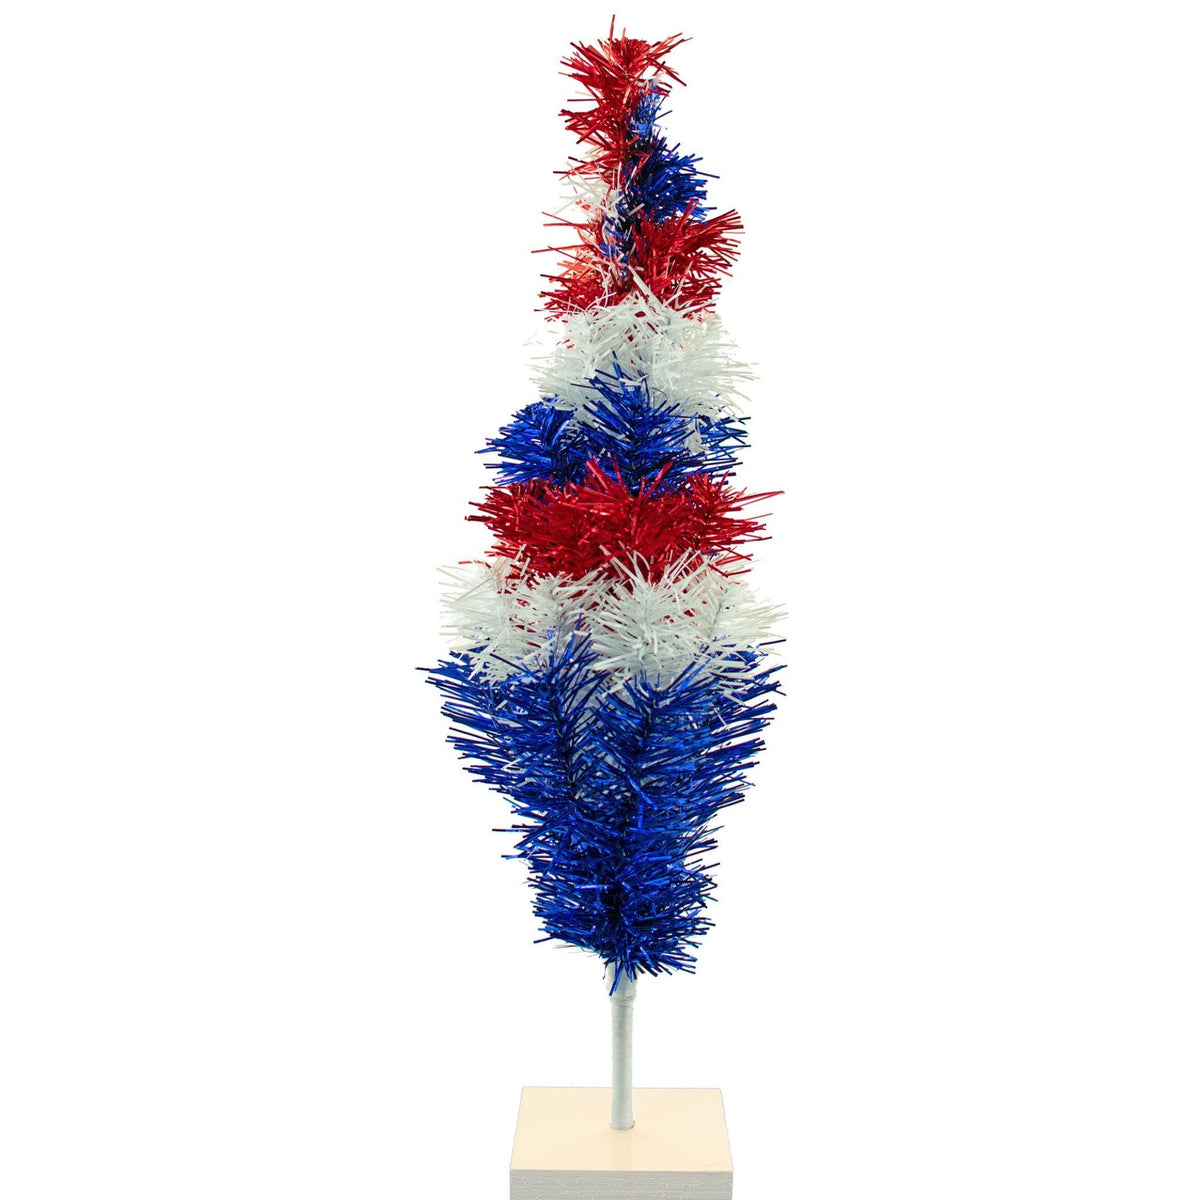 24in tall Red, White, and Blue Layered Tinsel Christmas Trees made by hand in the USA.  Decorate for the holidays with retro 4th of July-themed Trees and start creating your centerpiece now.  Shop for more at leedisplay.com